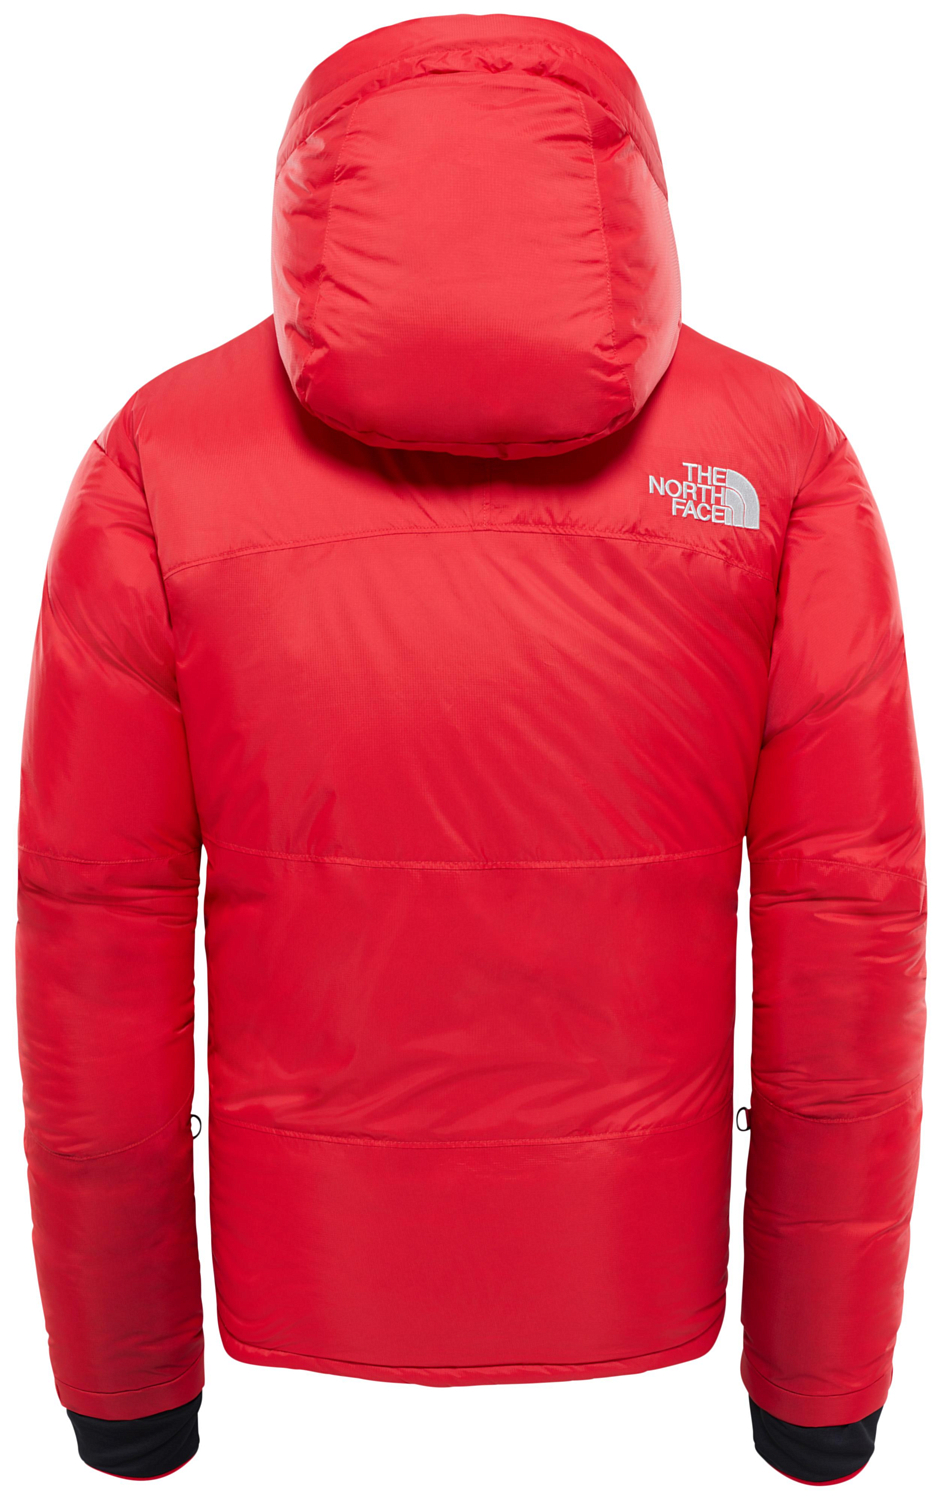 Куртка The North Face 2019-20 Himalayan M Tnf red/Tnf black